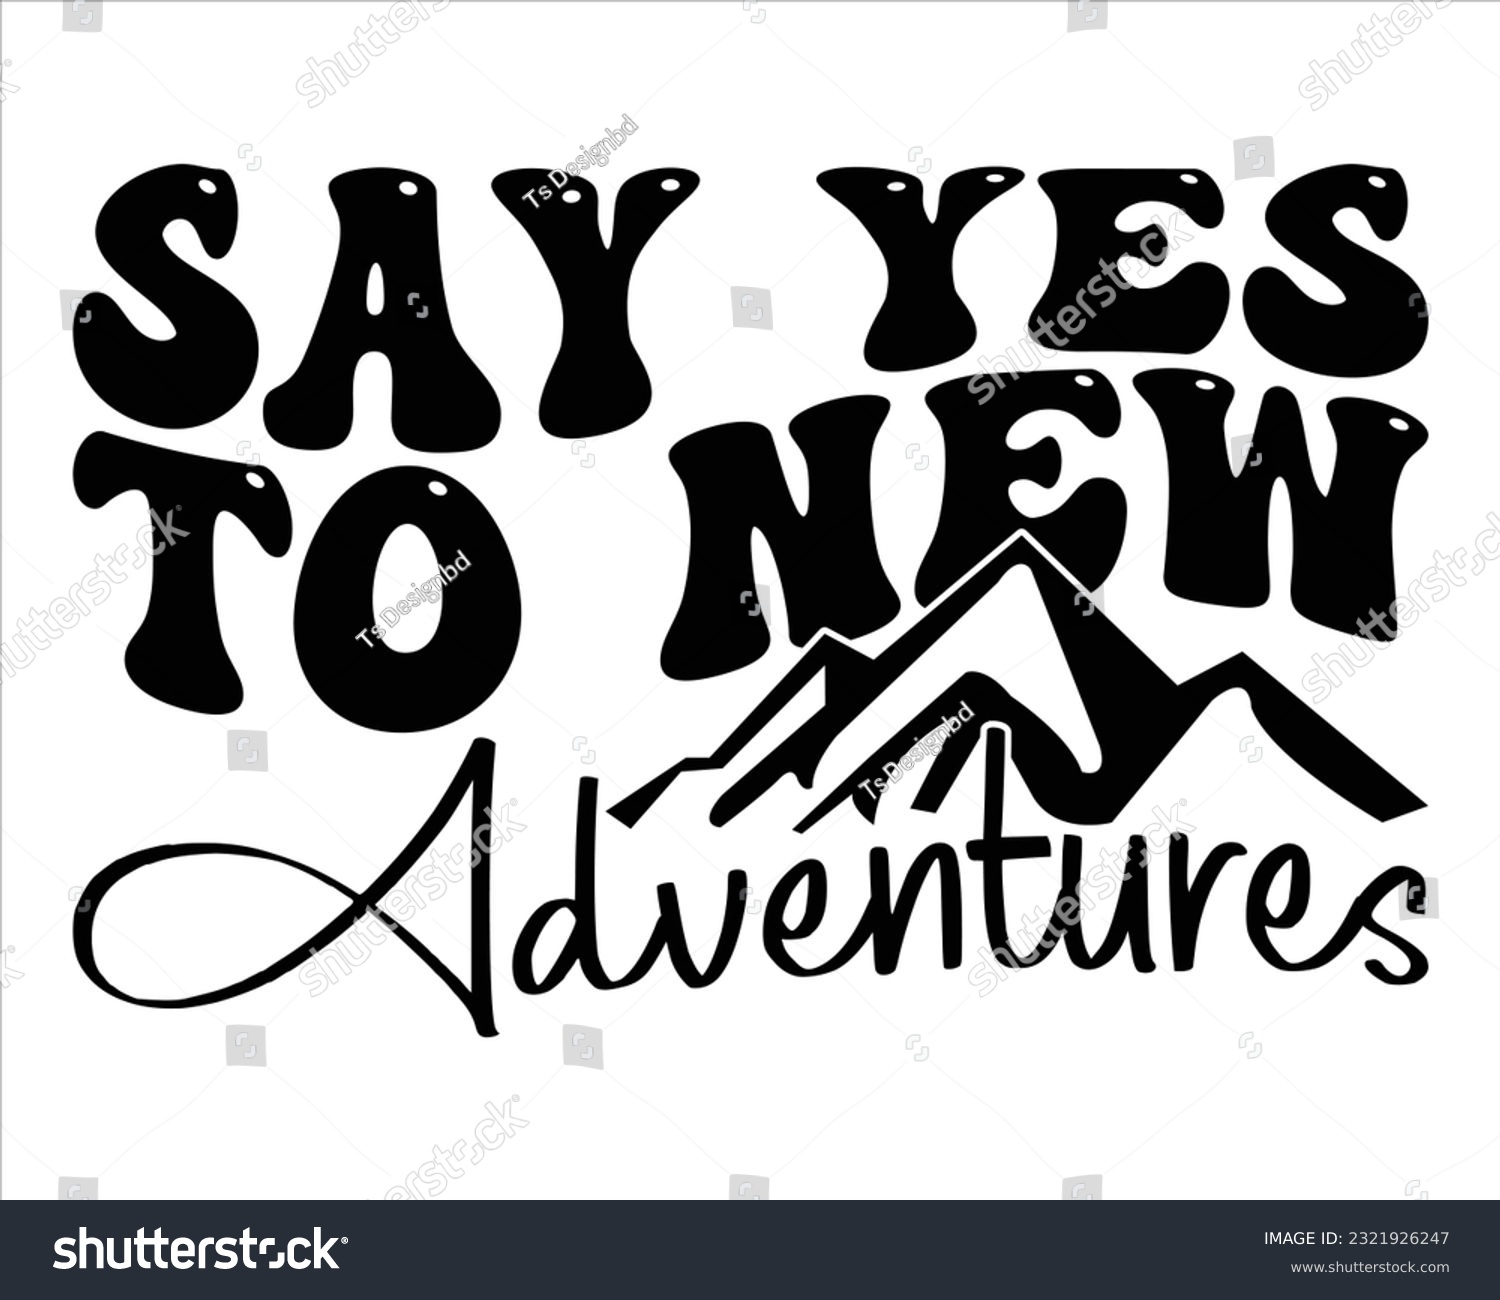 SVG of Say Yes To New Adventures Retro Svg Design,Hiking Retro Svg Design, Mountain illustration, outdoor adventure ,Outdoor Adventure Inspiring Motivation Quote, camping,groovy design svg